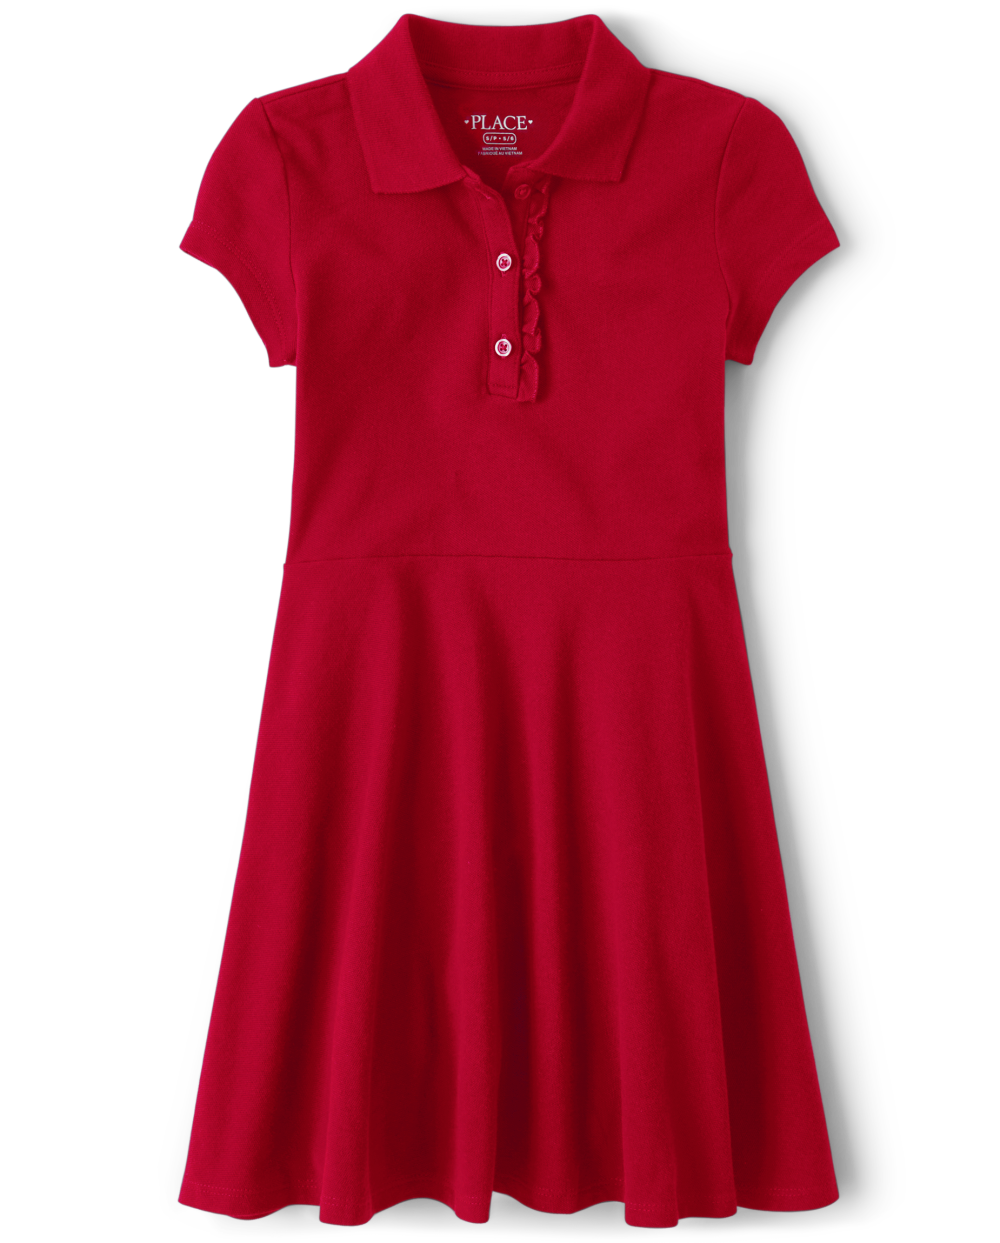 Girls Collared Short Sleeves Sleeves Above the Knee Ruffle Trim Dress